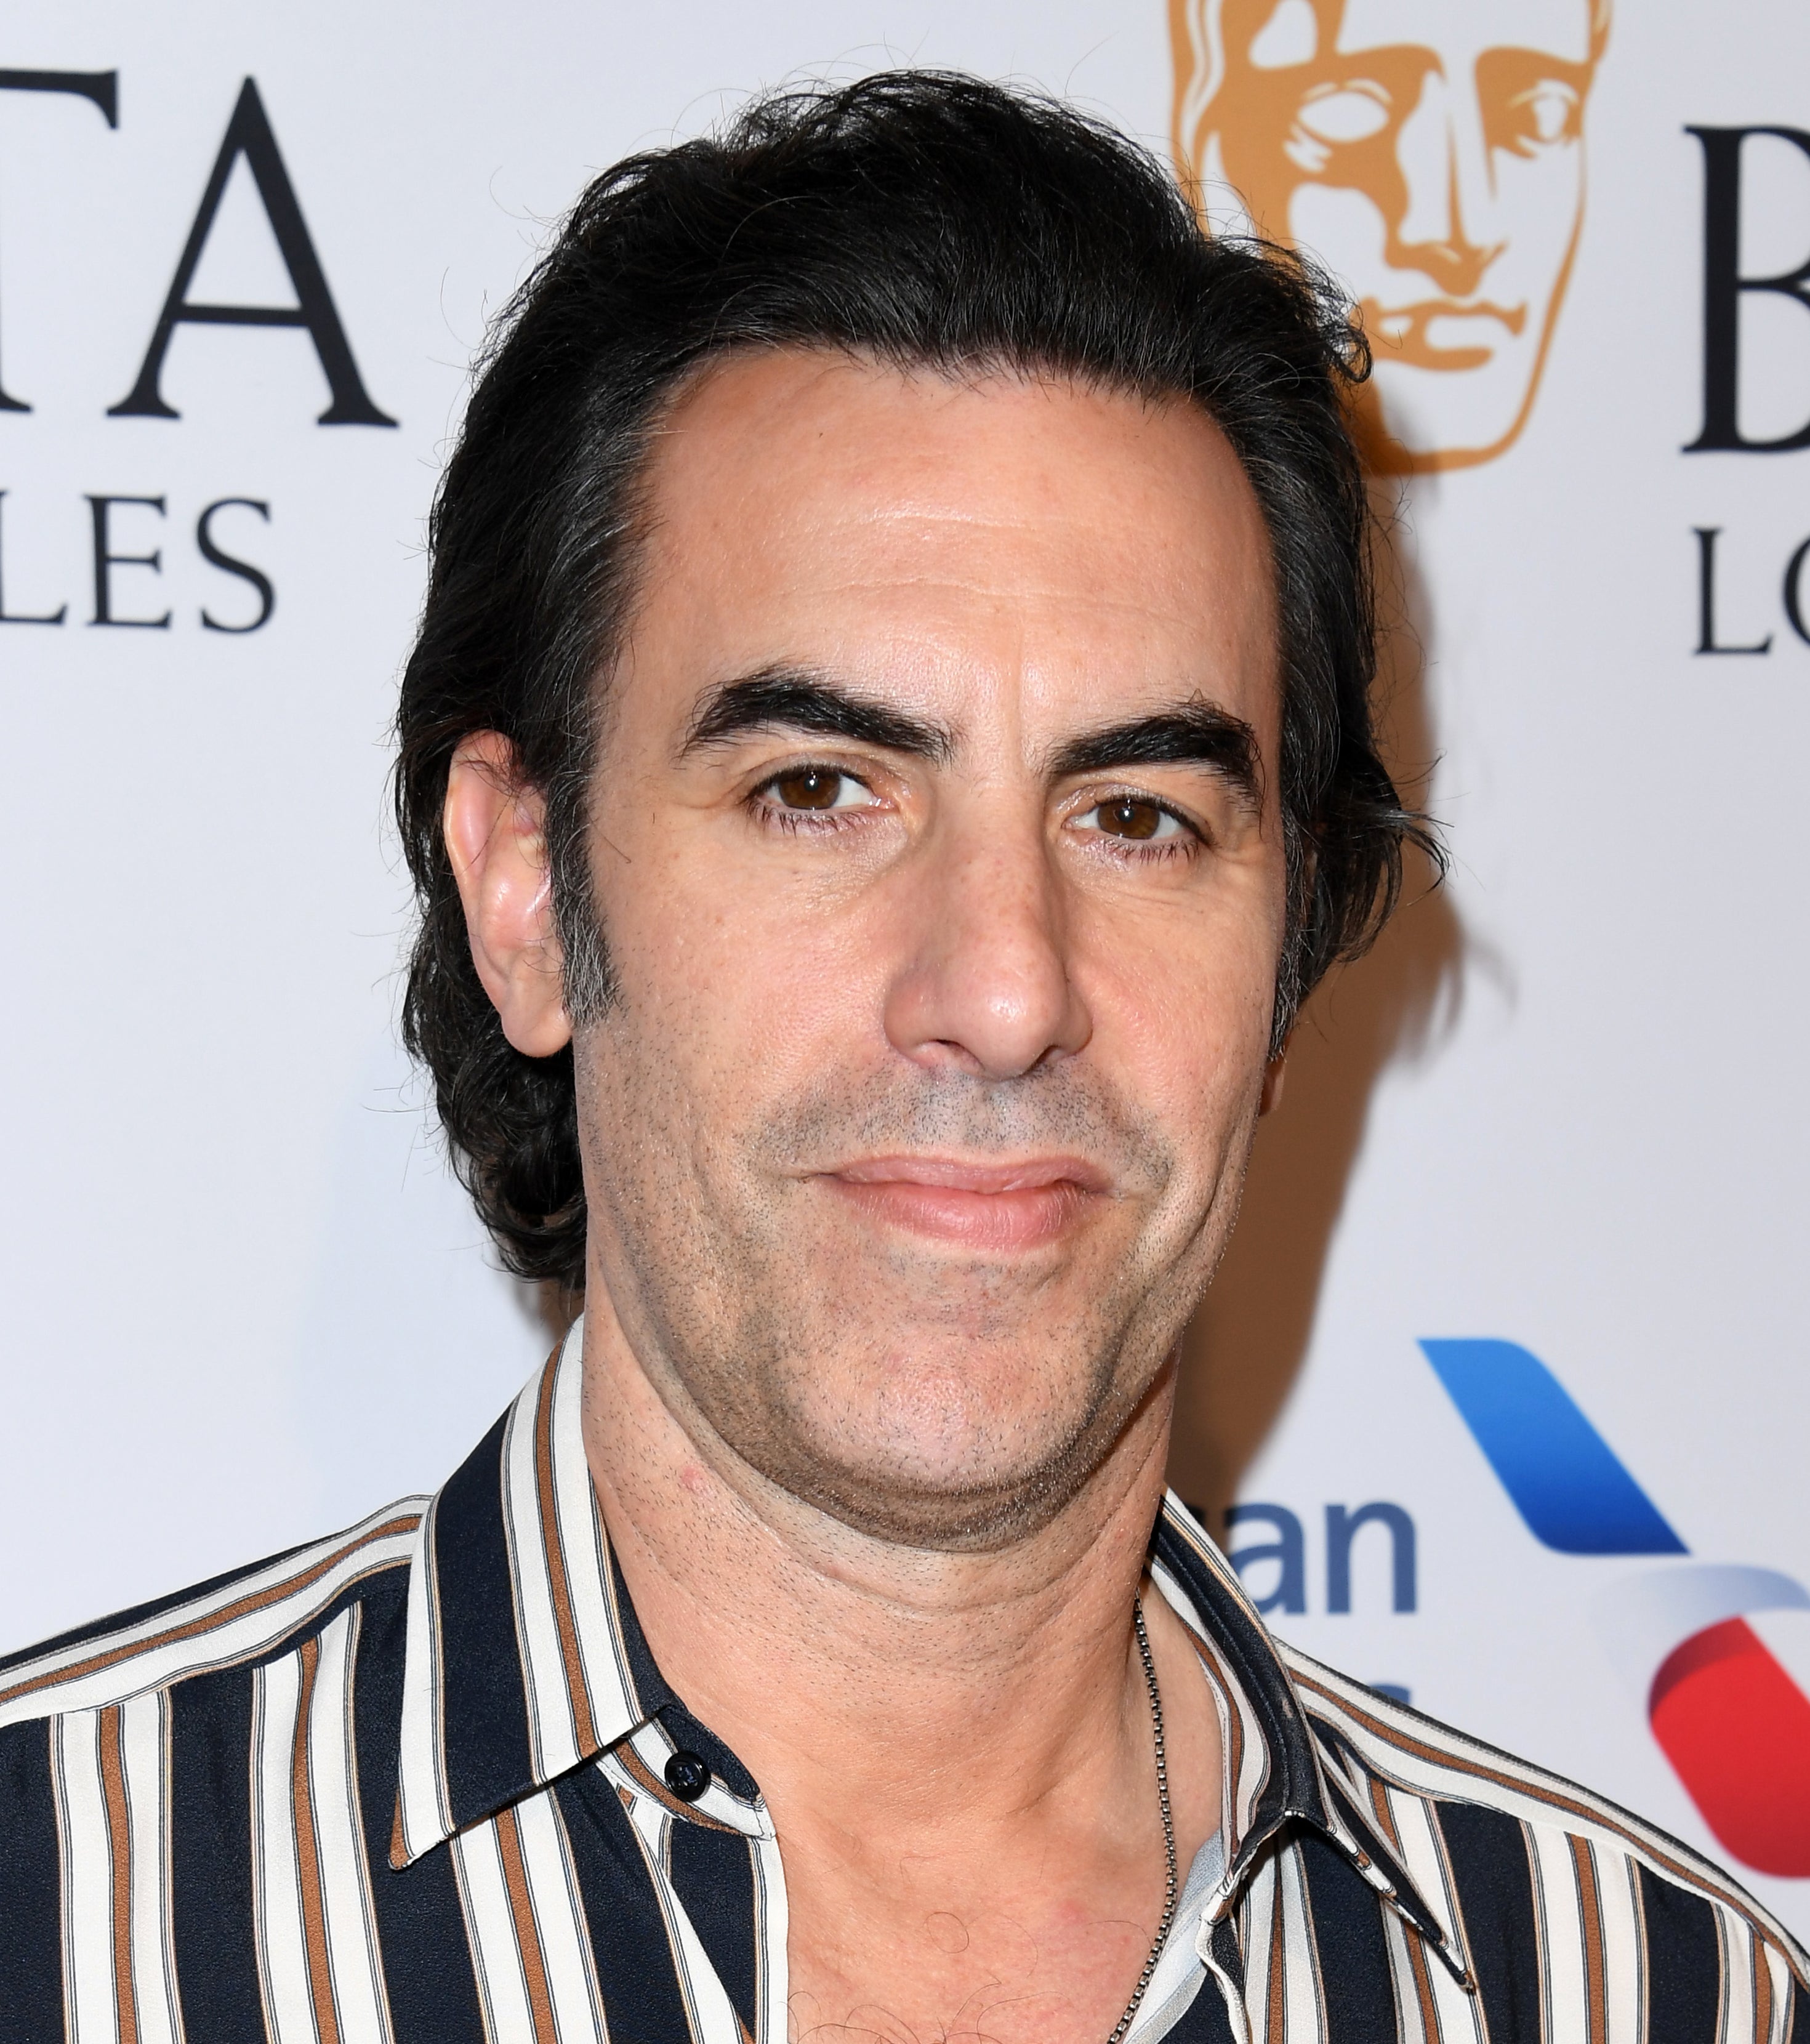 Sacha Baron Cohen in striped shirt on the red carpet